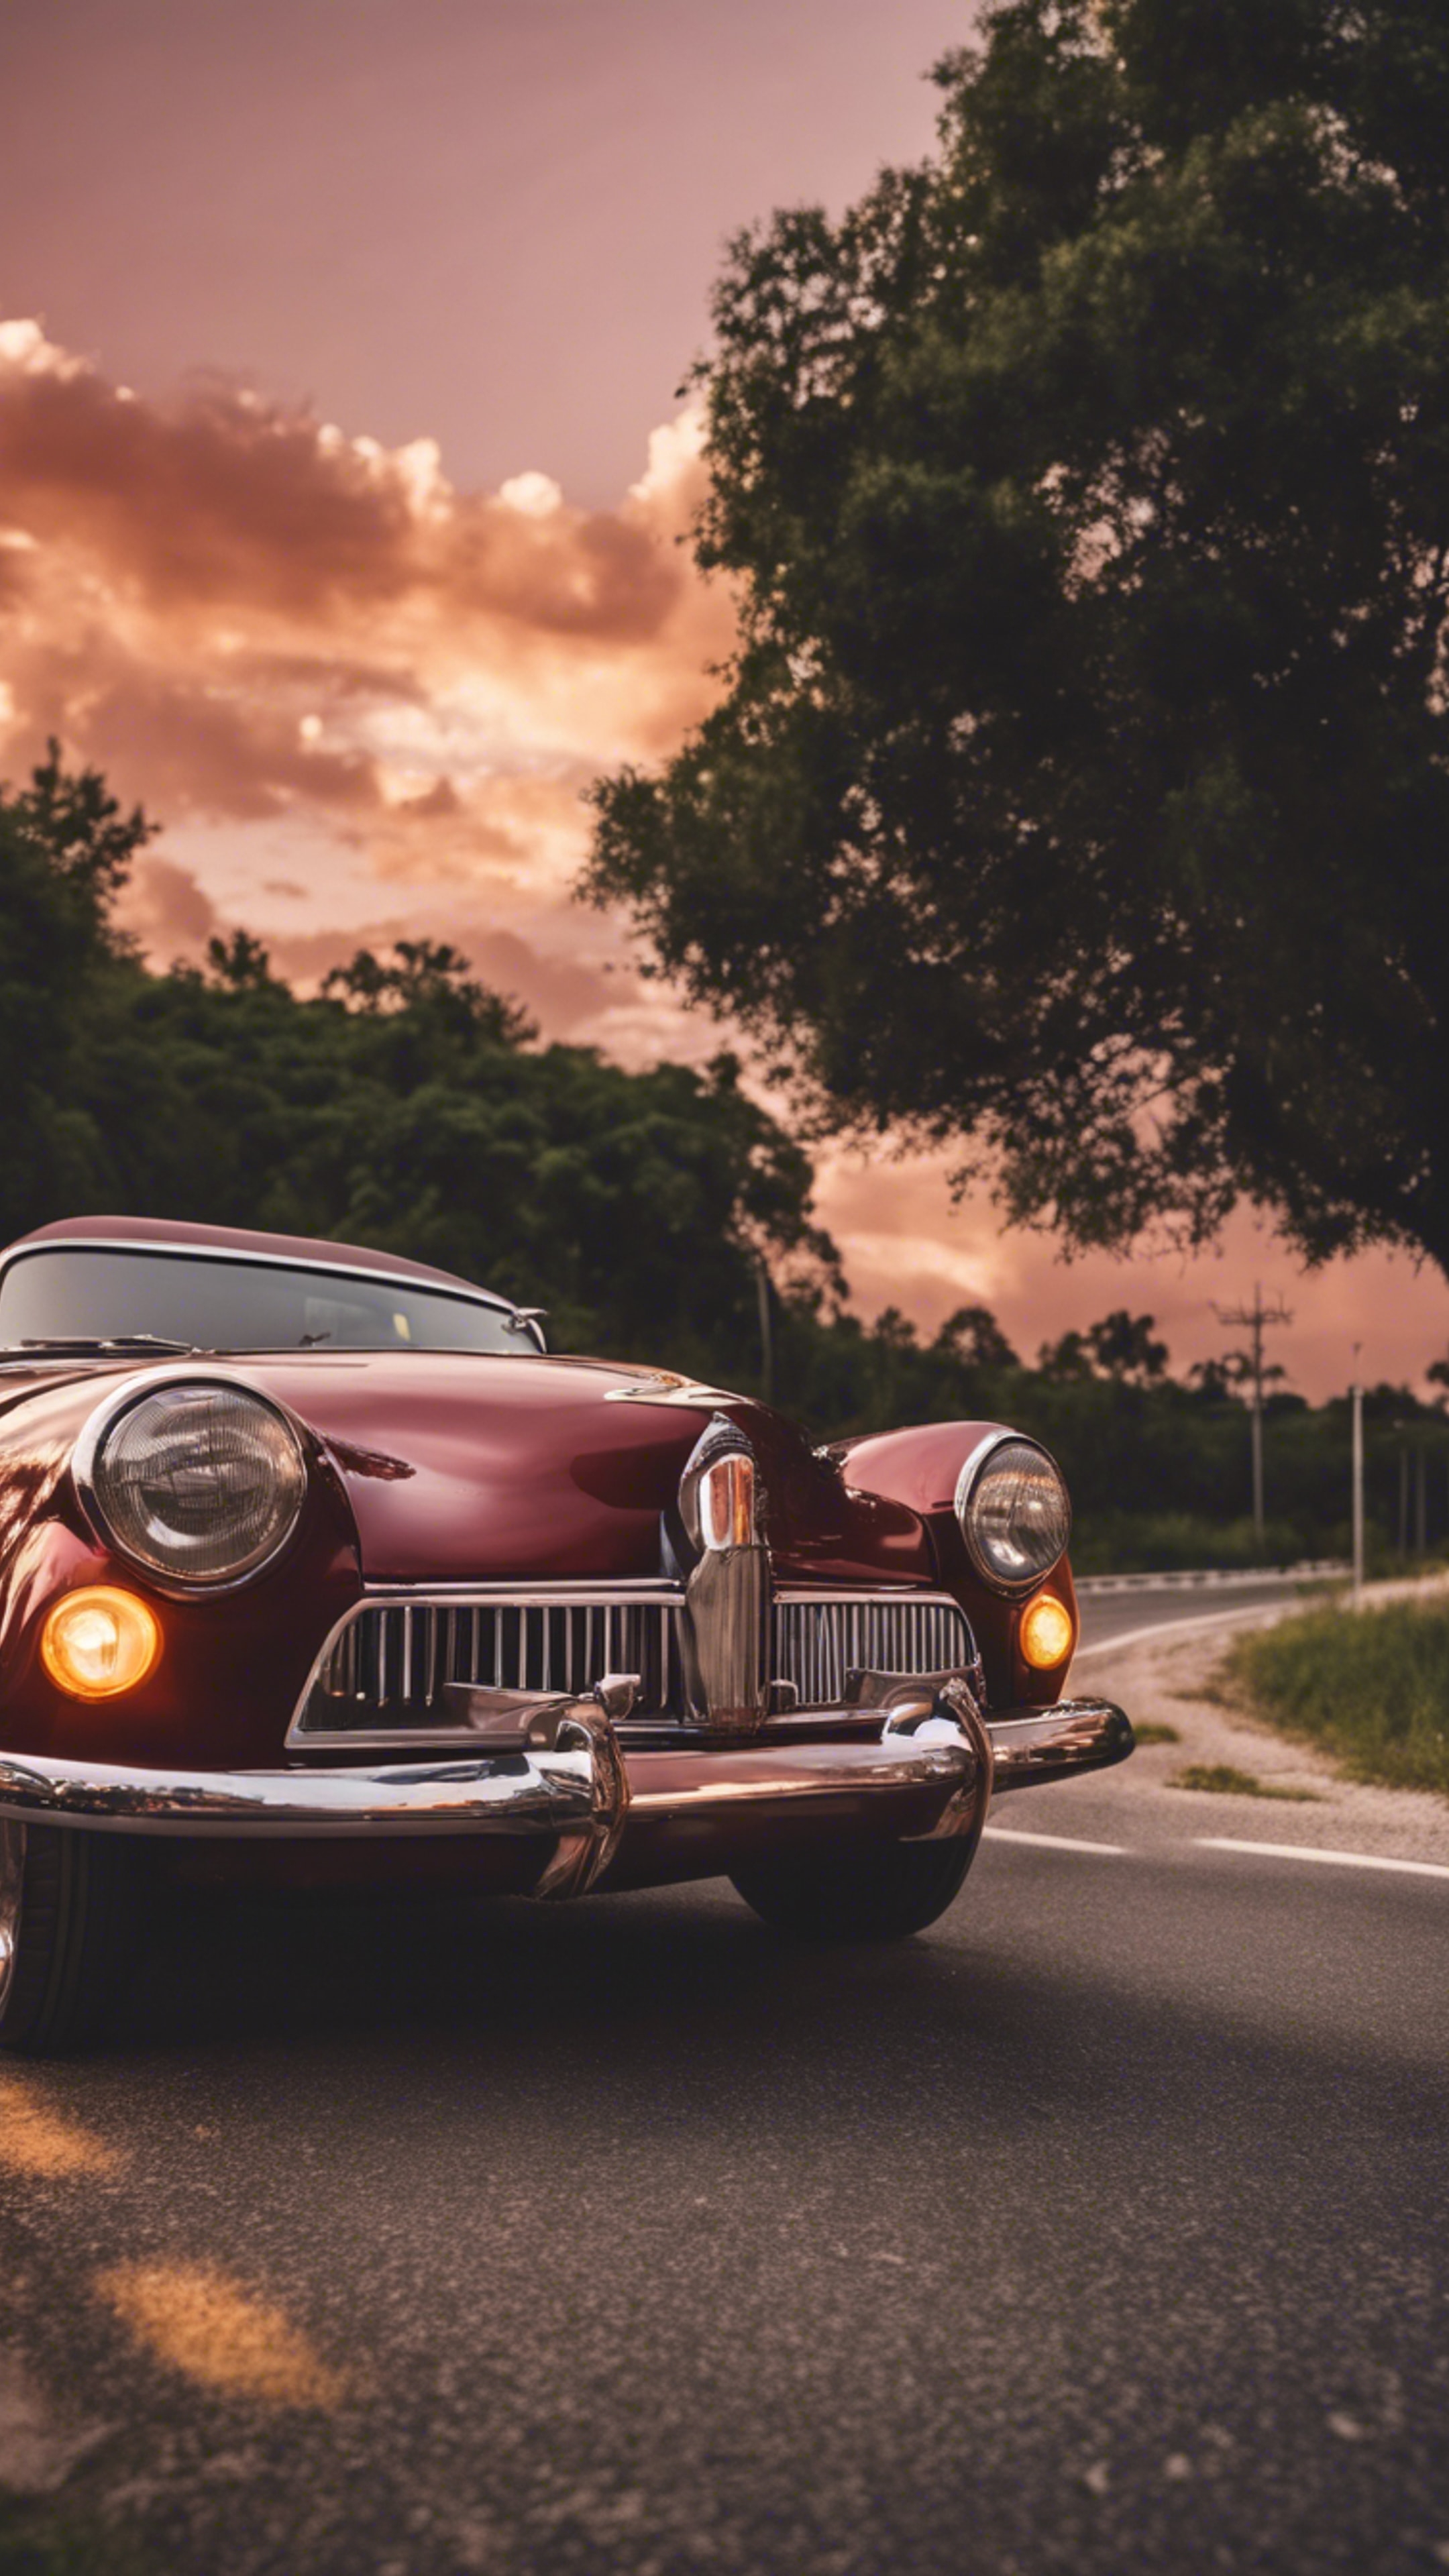 A cool maroon vintage car cruising down a highway during sunset. ផ្ទាំង​រូបភាព[f4173fef60b3476589ab]